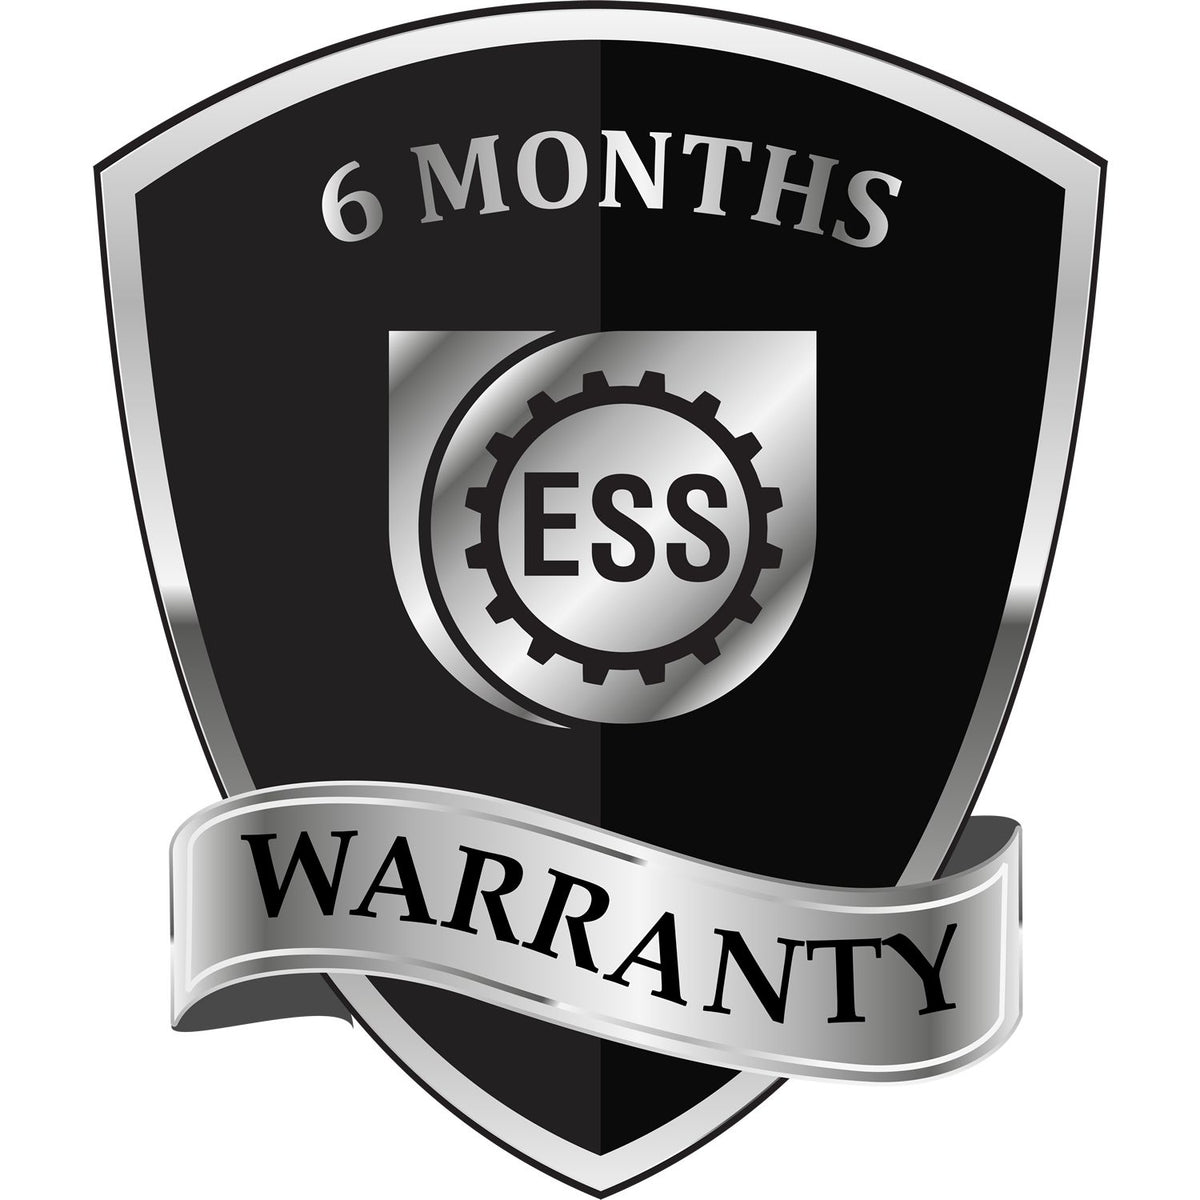 A badge or emblem showing a warranty icon for the Premium MaxLight Pre-Inked Utah Engineering Stamp